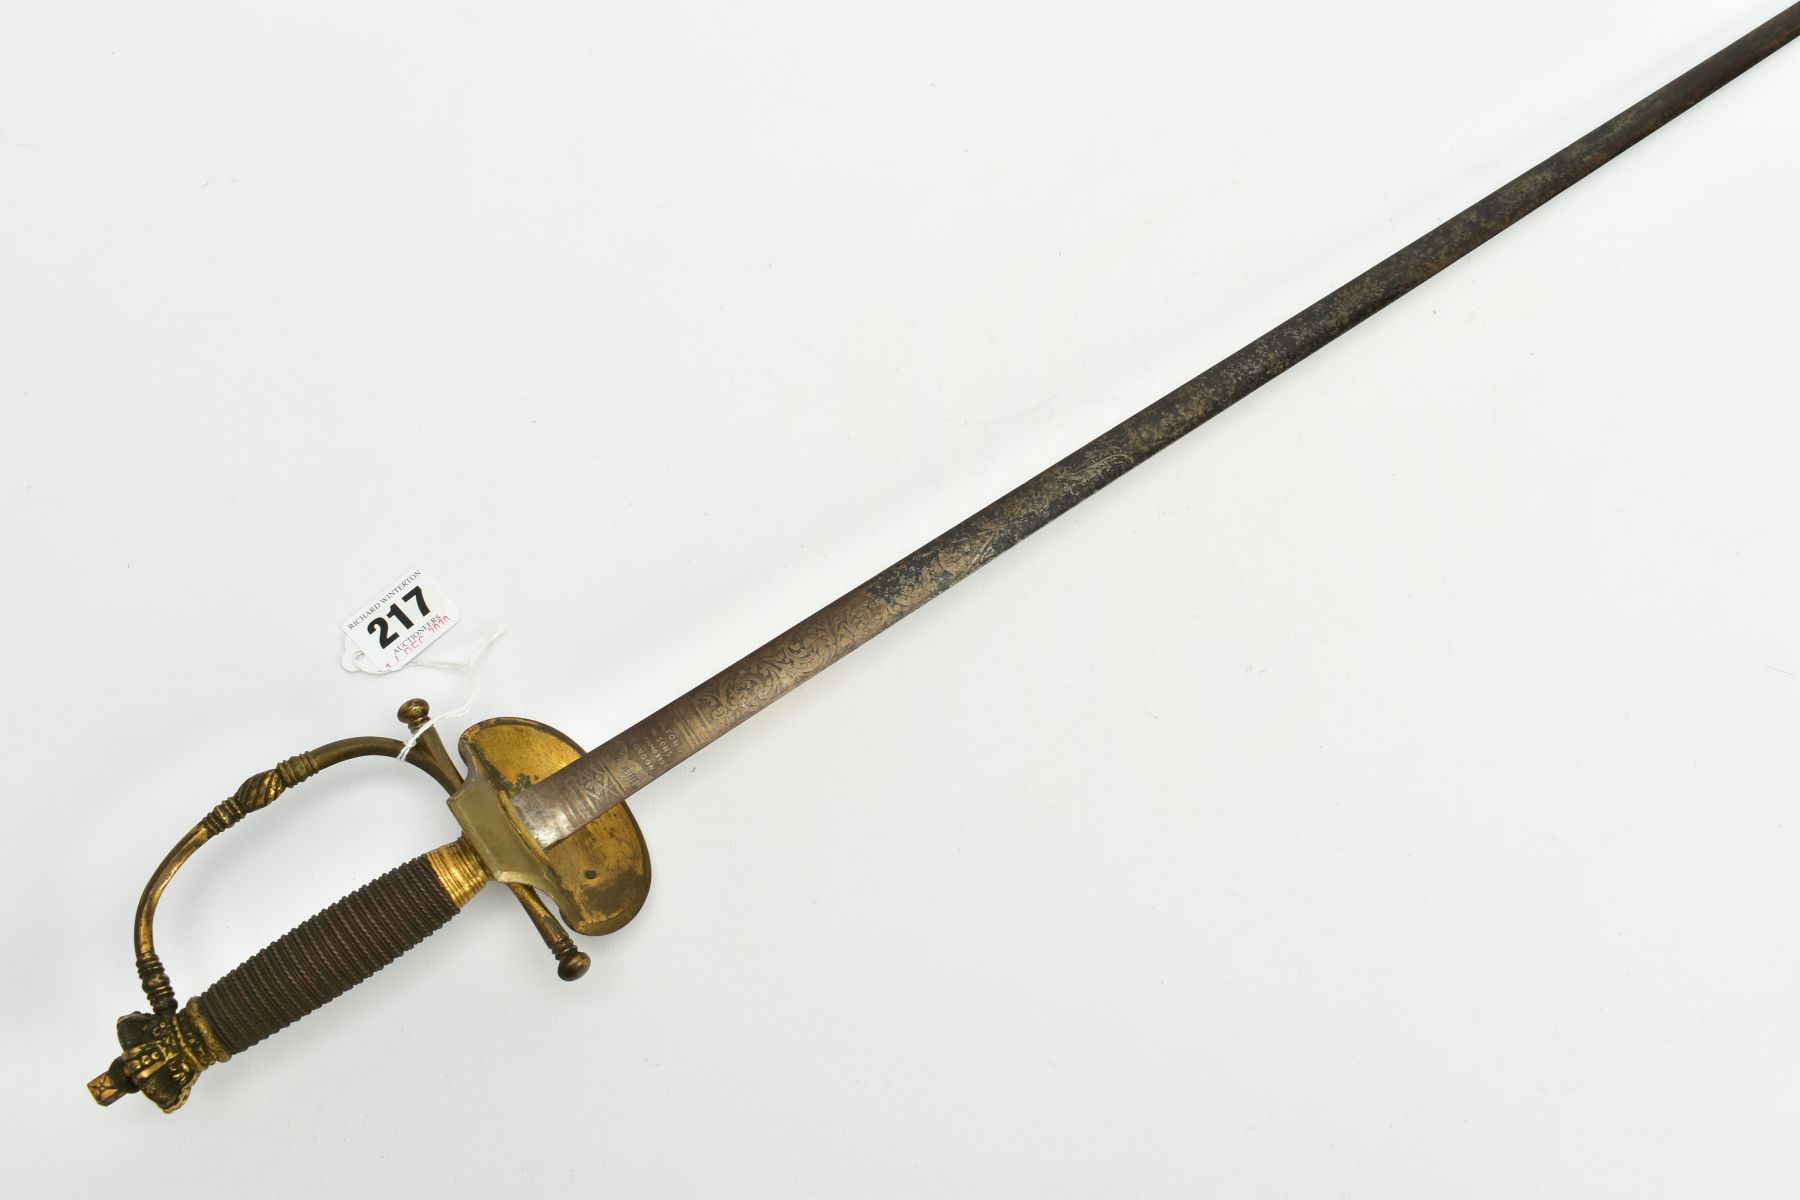 A BRITISH VICTORIAN ERA RAPIER SWORD, blade is approximately 79cm in length, the blade is - Image 7 of 11